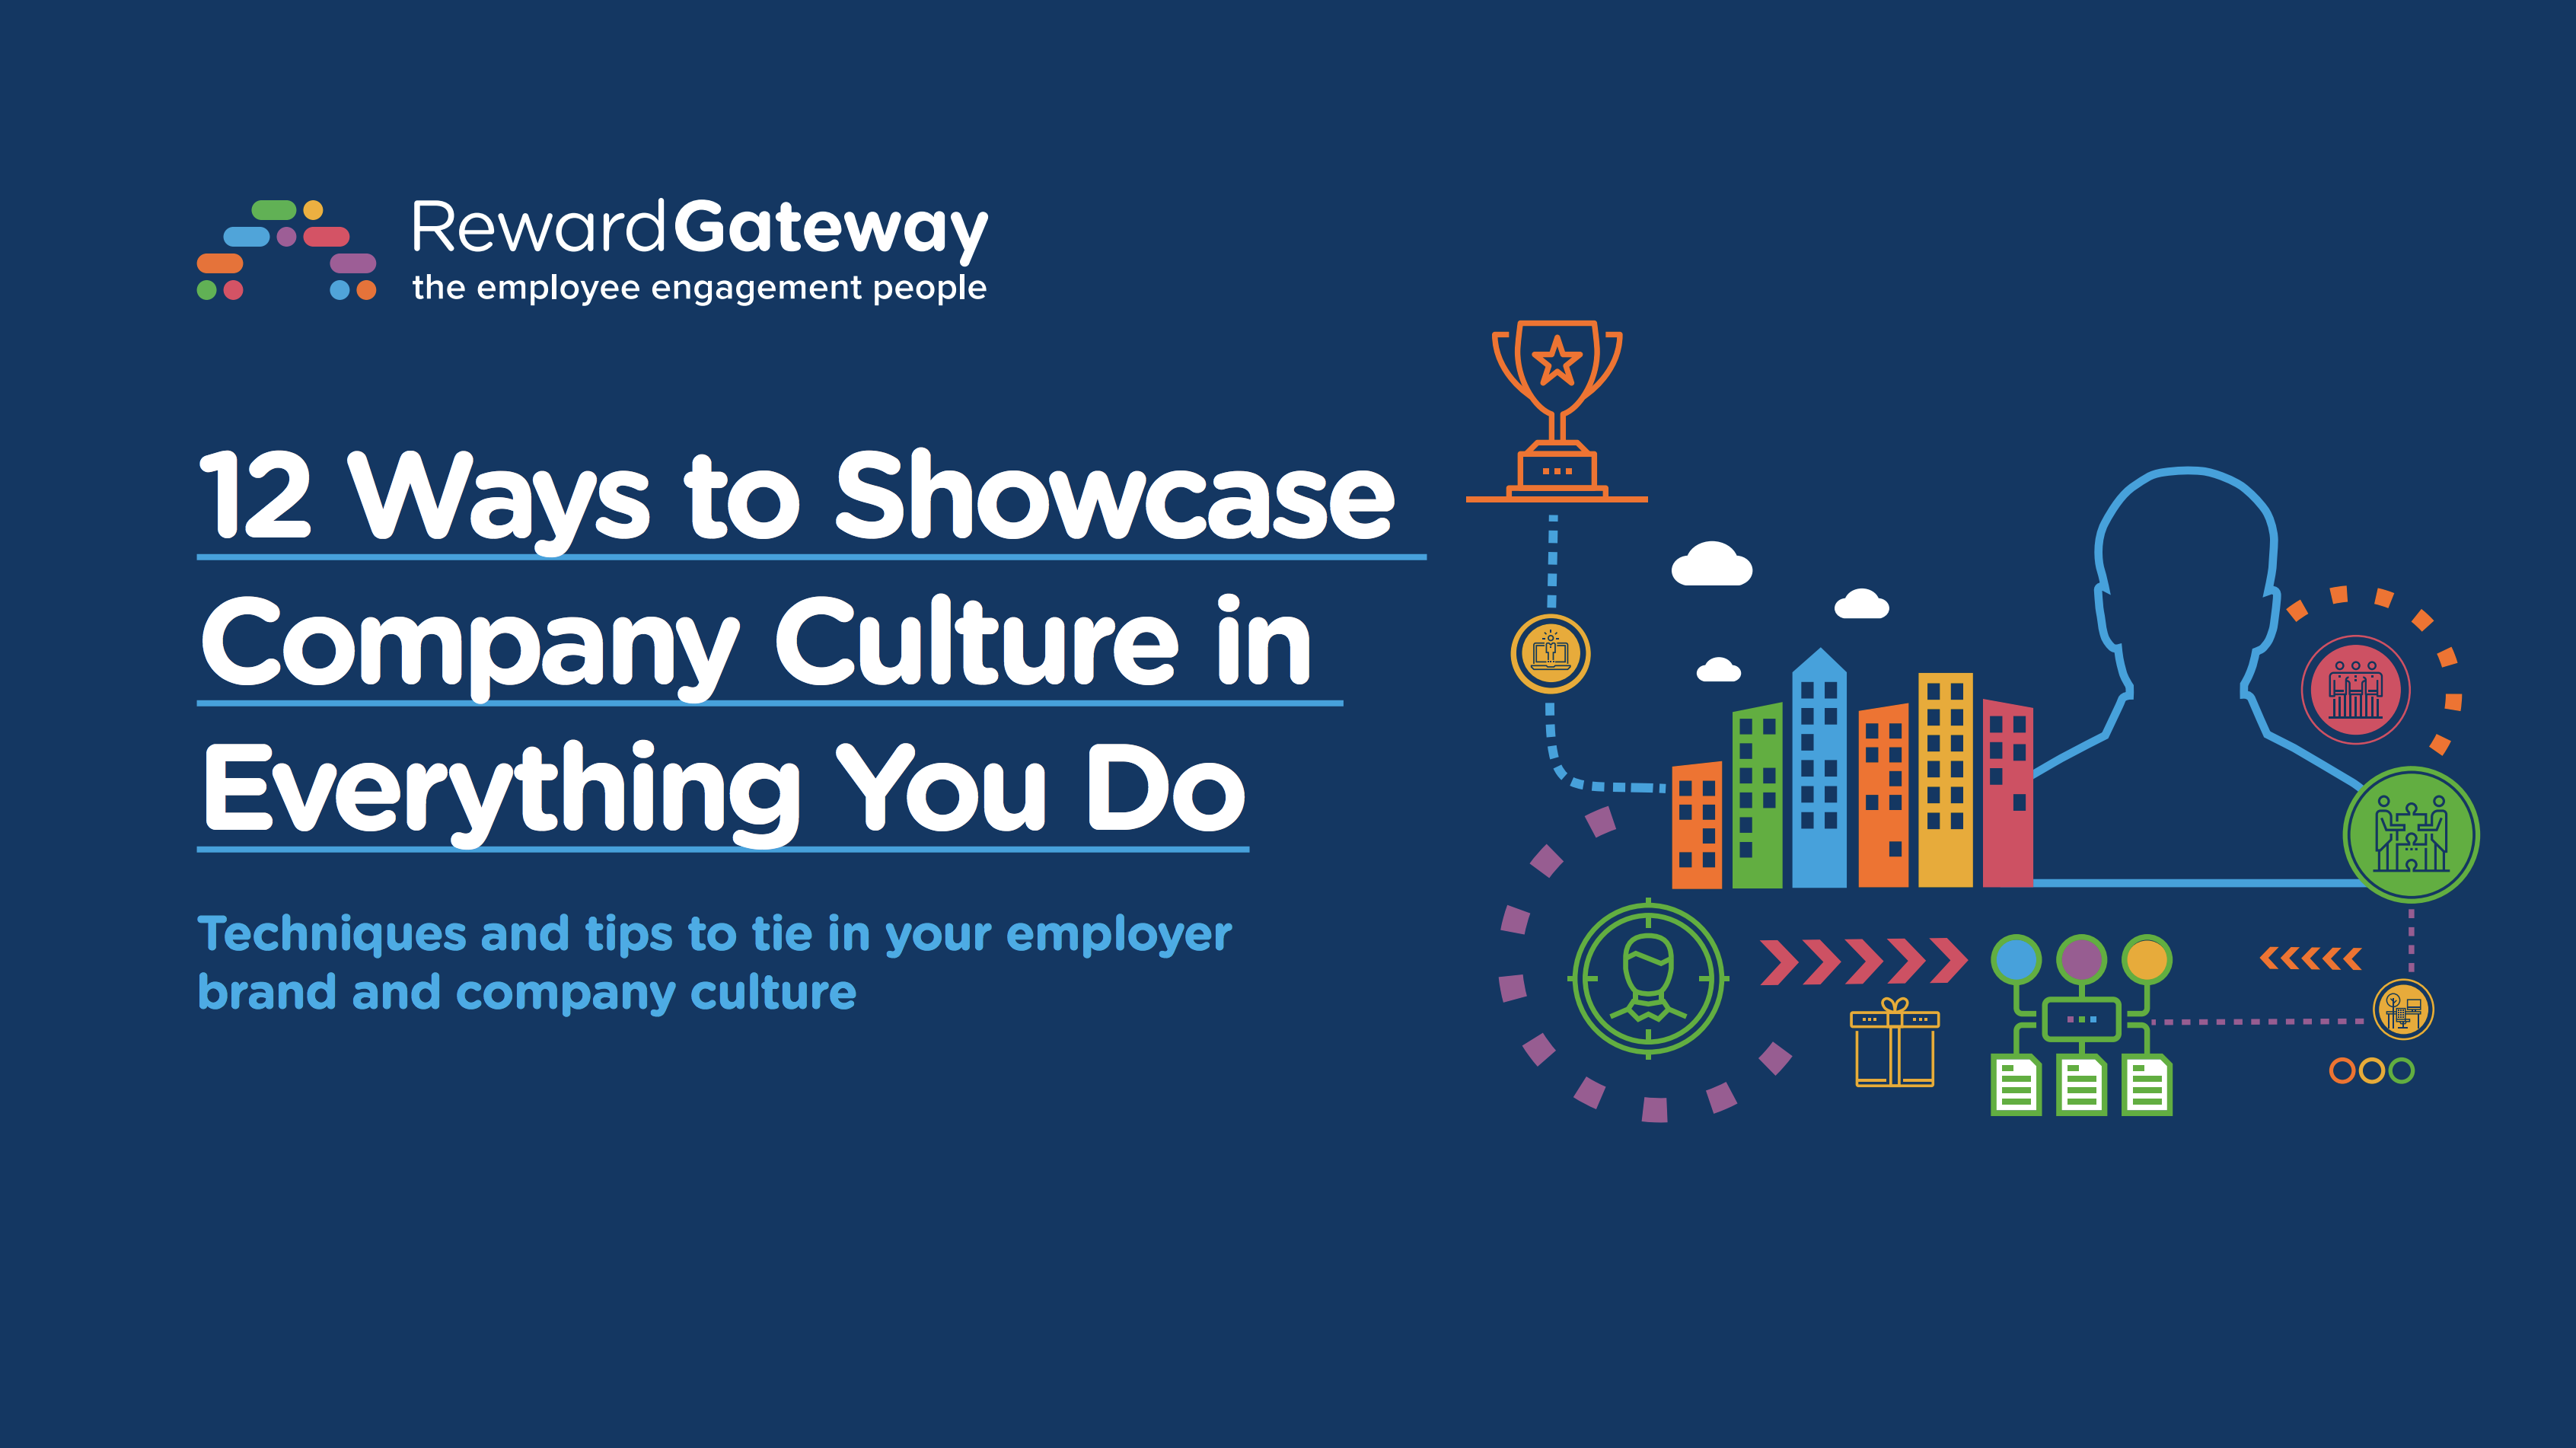 Improve employee value proposition by showcasing culture